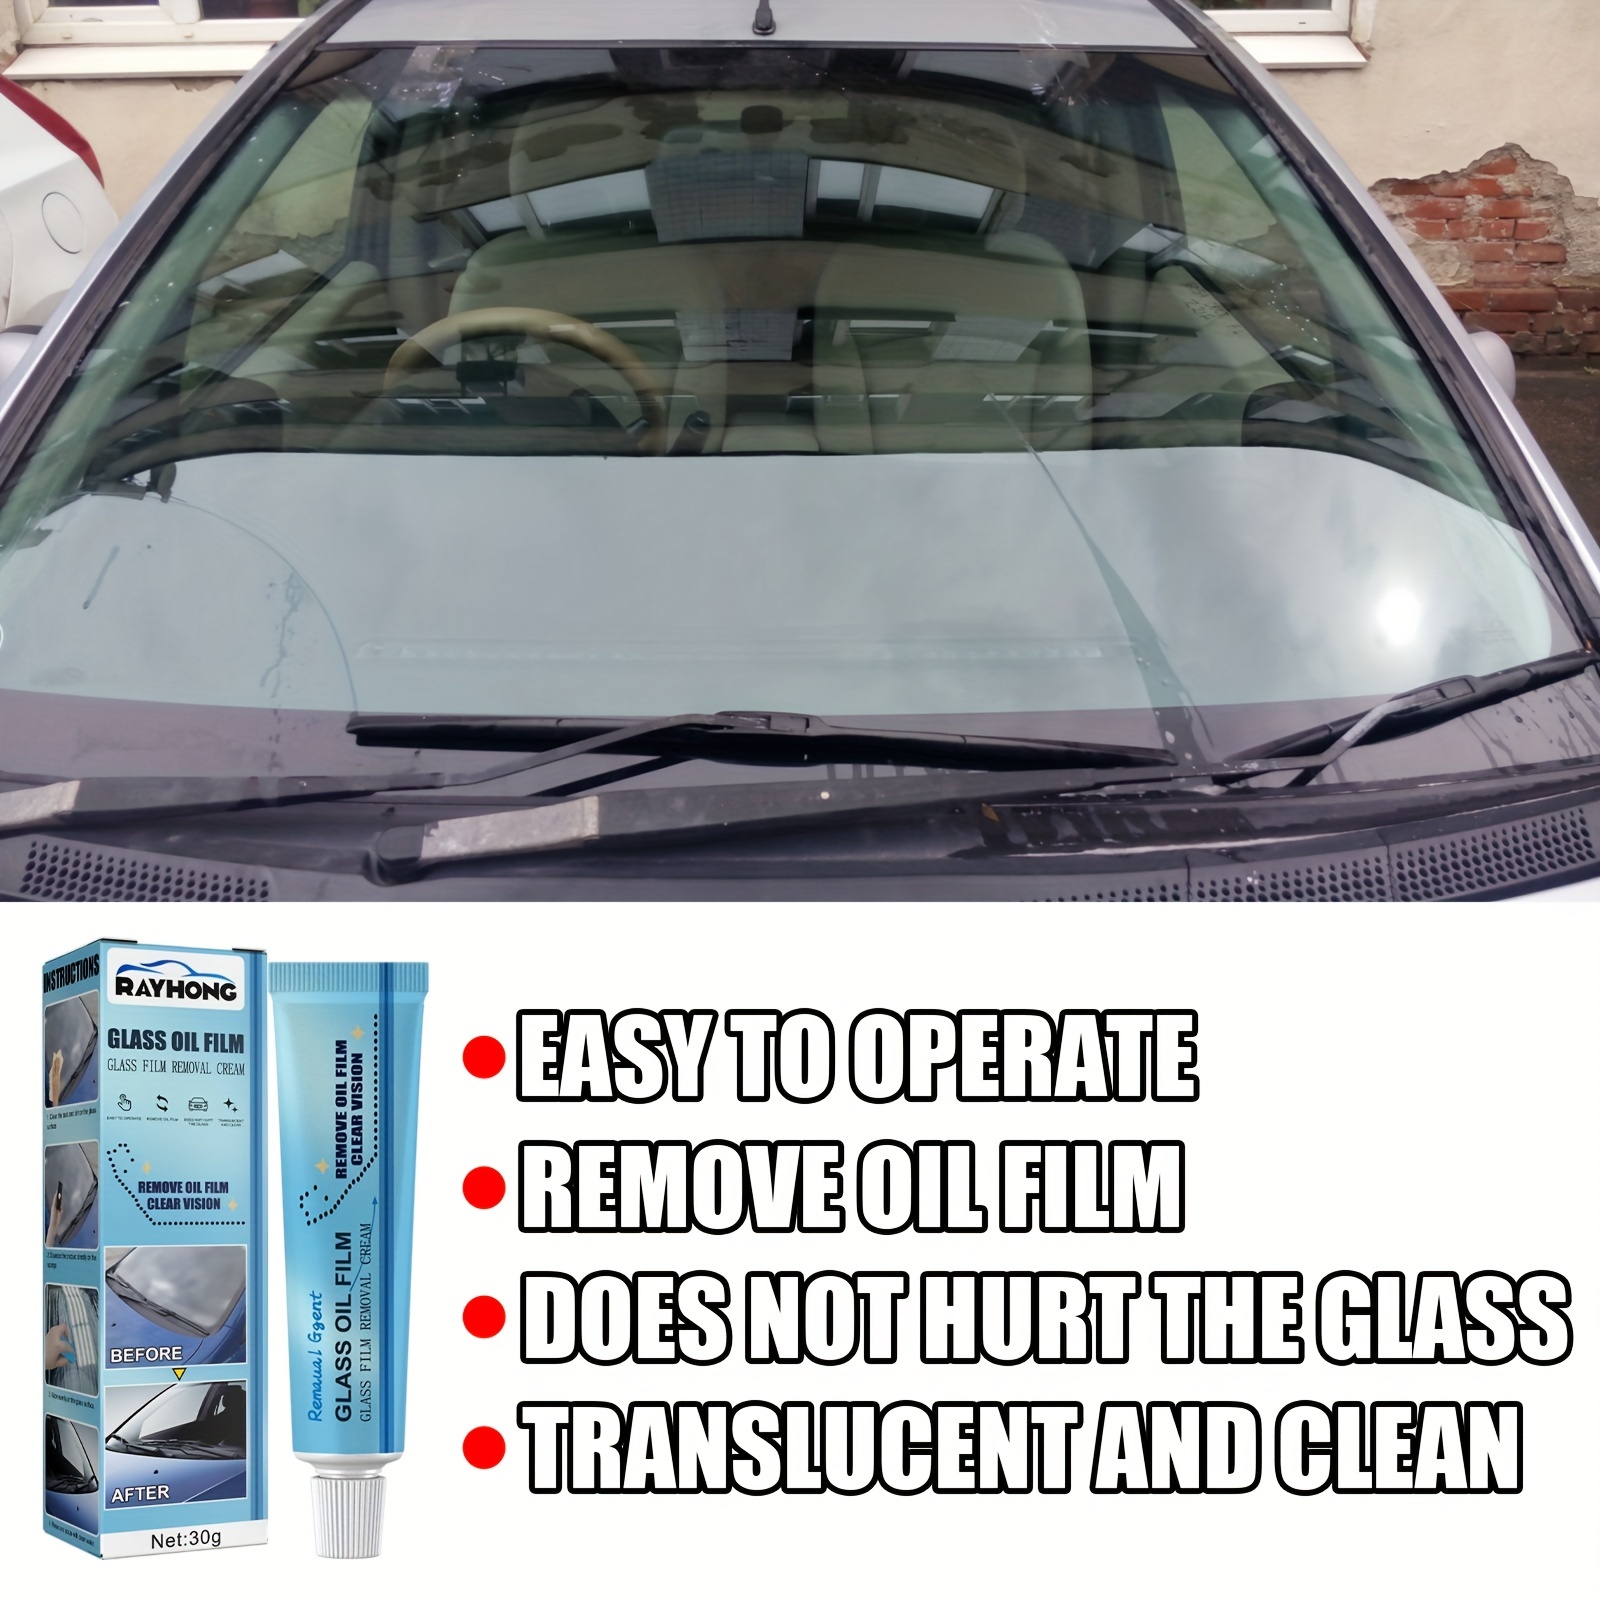 Easily Remove Car Glass Oil Film With Wash-Free Wipes - No Windshield  Decontamination Needed!